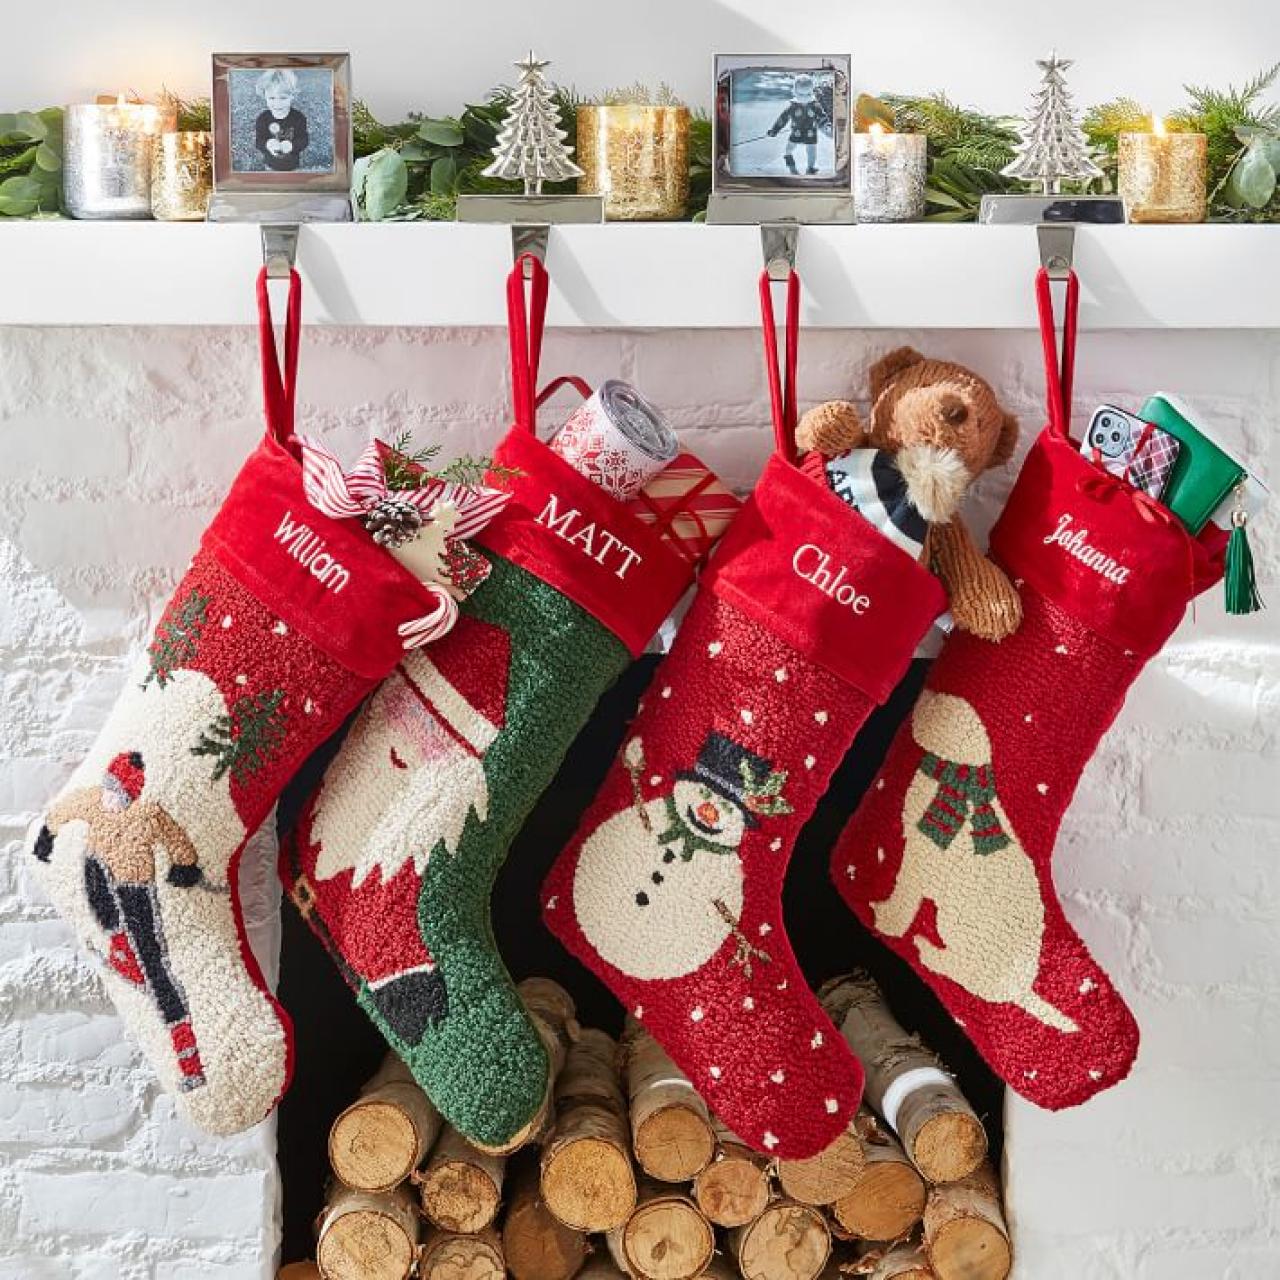 Personalized Embroidered Christmas Stockings Festive Holiday Decor 